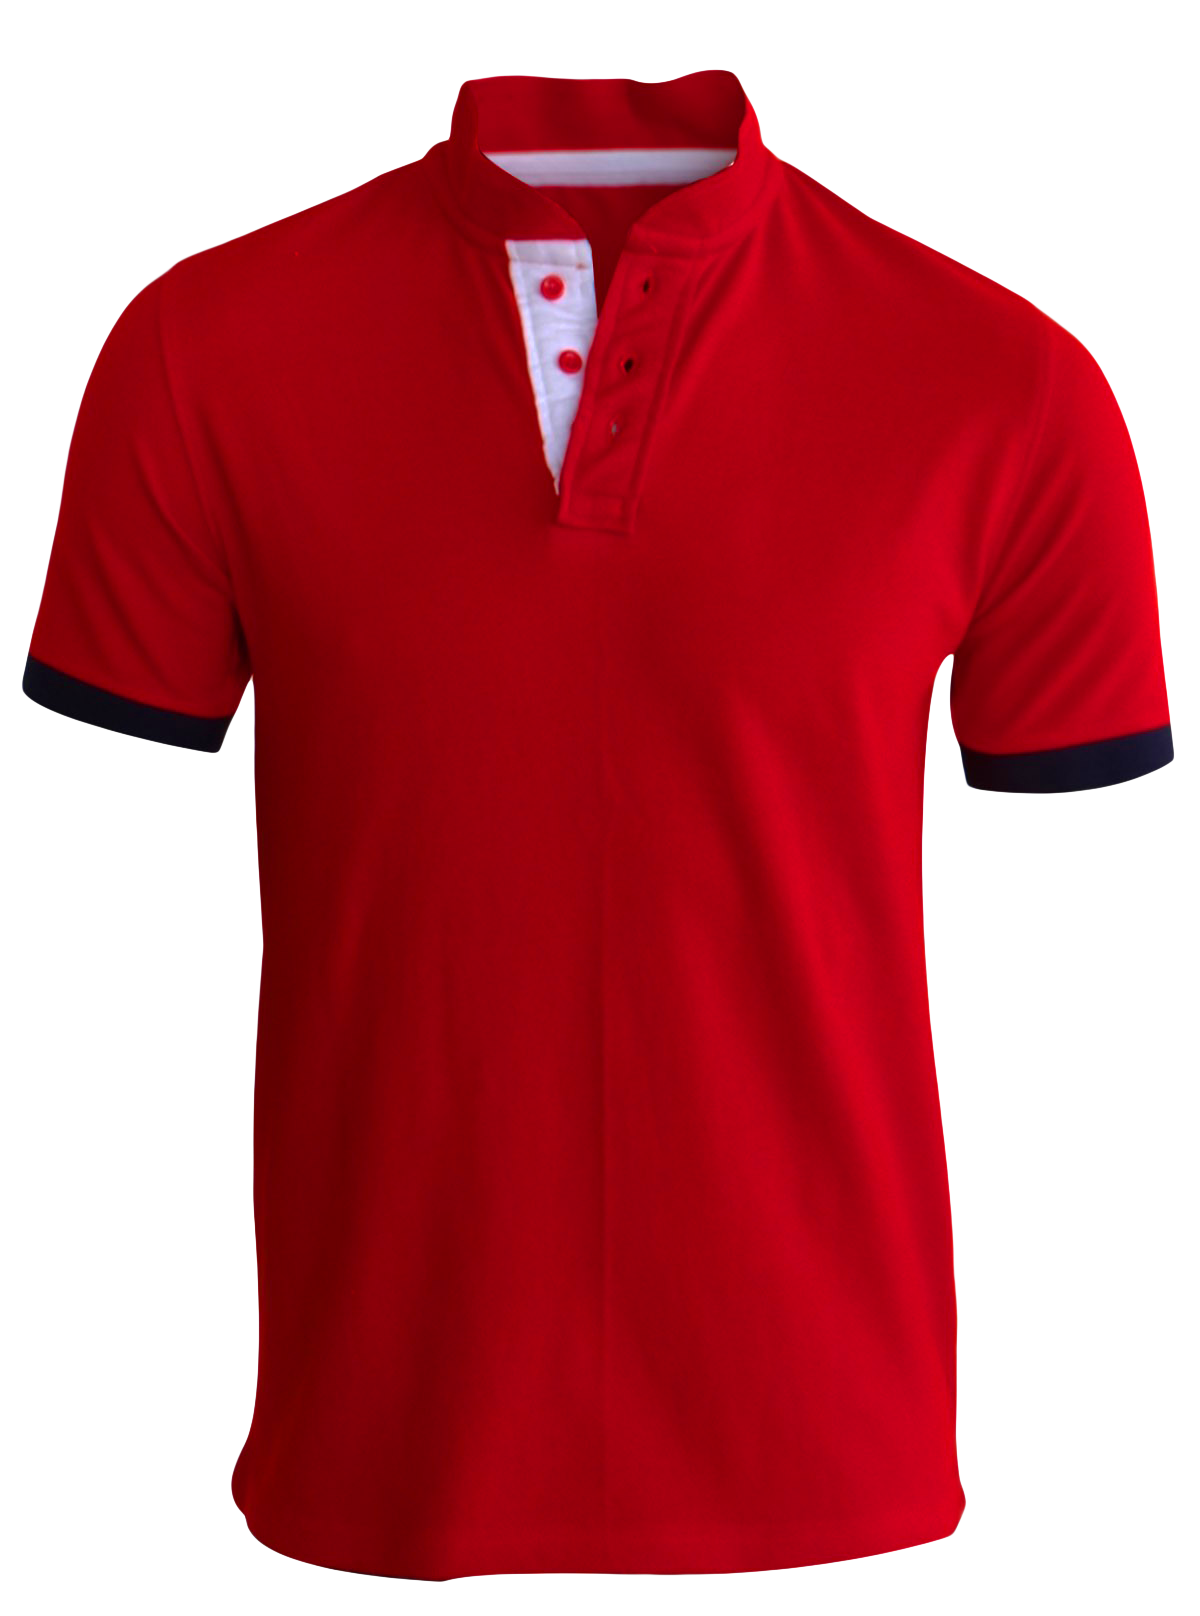 Red T Shirt Png Transparent Image - Tshirt, Transparent background PNG HD thumbnail